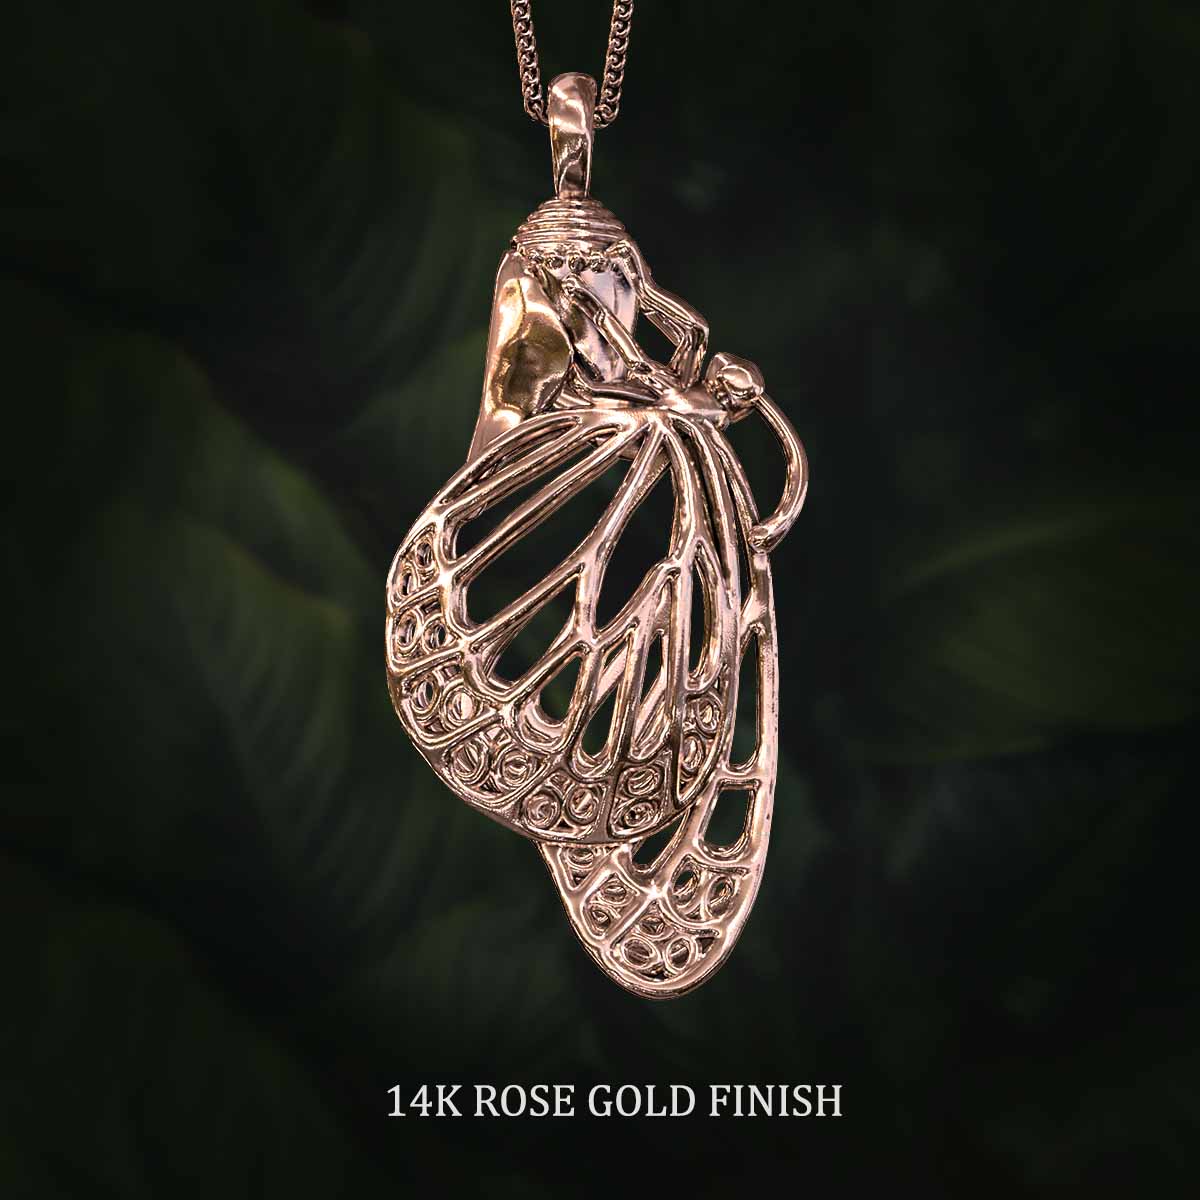 14k-Rose-Gold-Finish-Monarch-Chrysalis-Pendant-Jewelry-For-Necklace